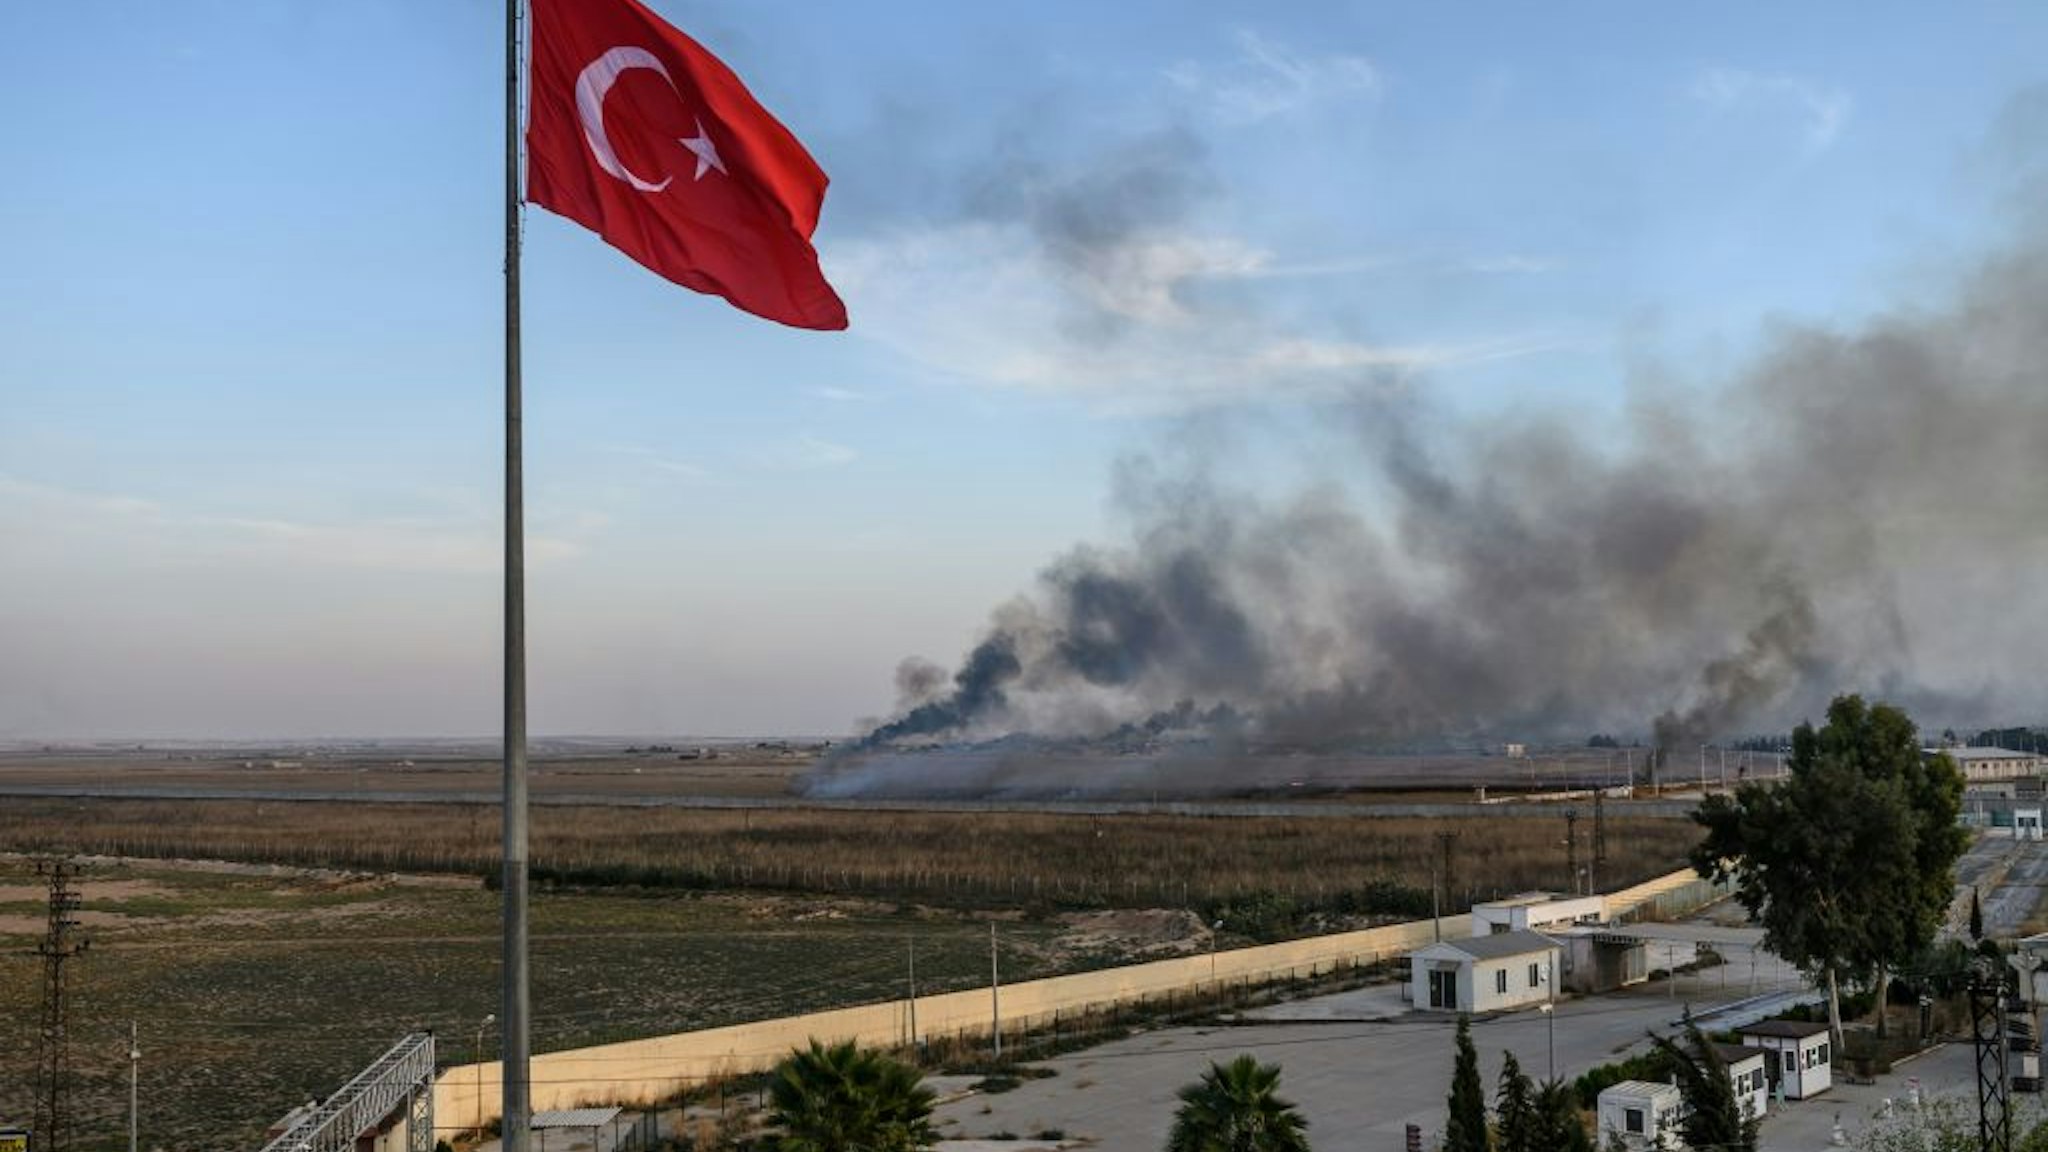 Smoke rises from the Syrian town of Tal Abyad, in a picture taken from the Turkish side of the border where the Turkish flag is seen in Akcakale on October 10, 2019, on the second day of Turkey's military operation against Kurdish forces.